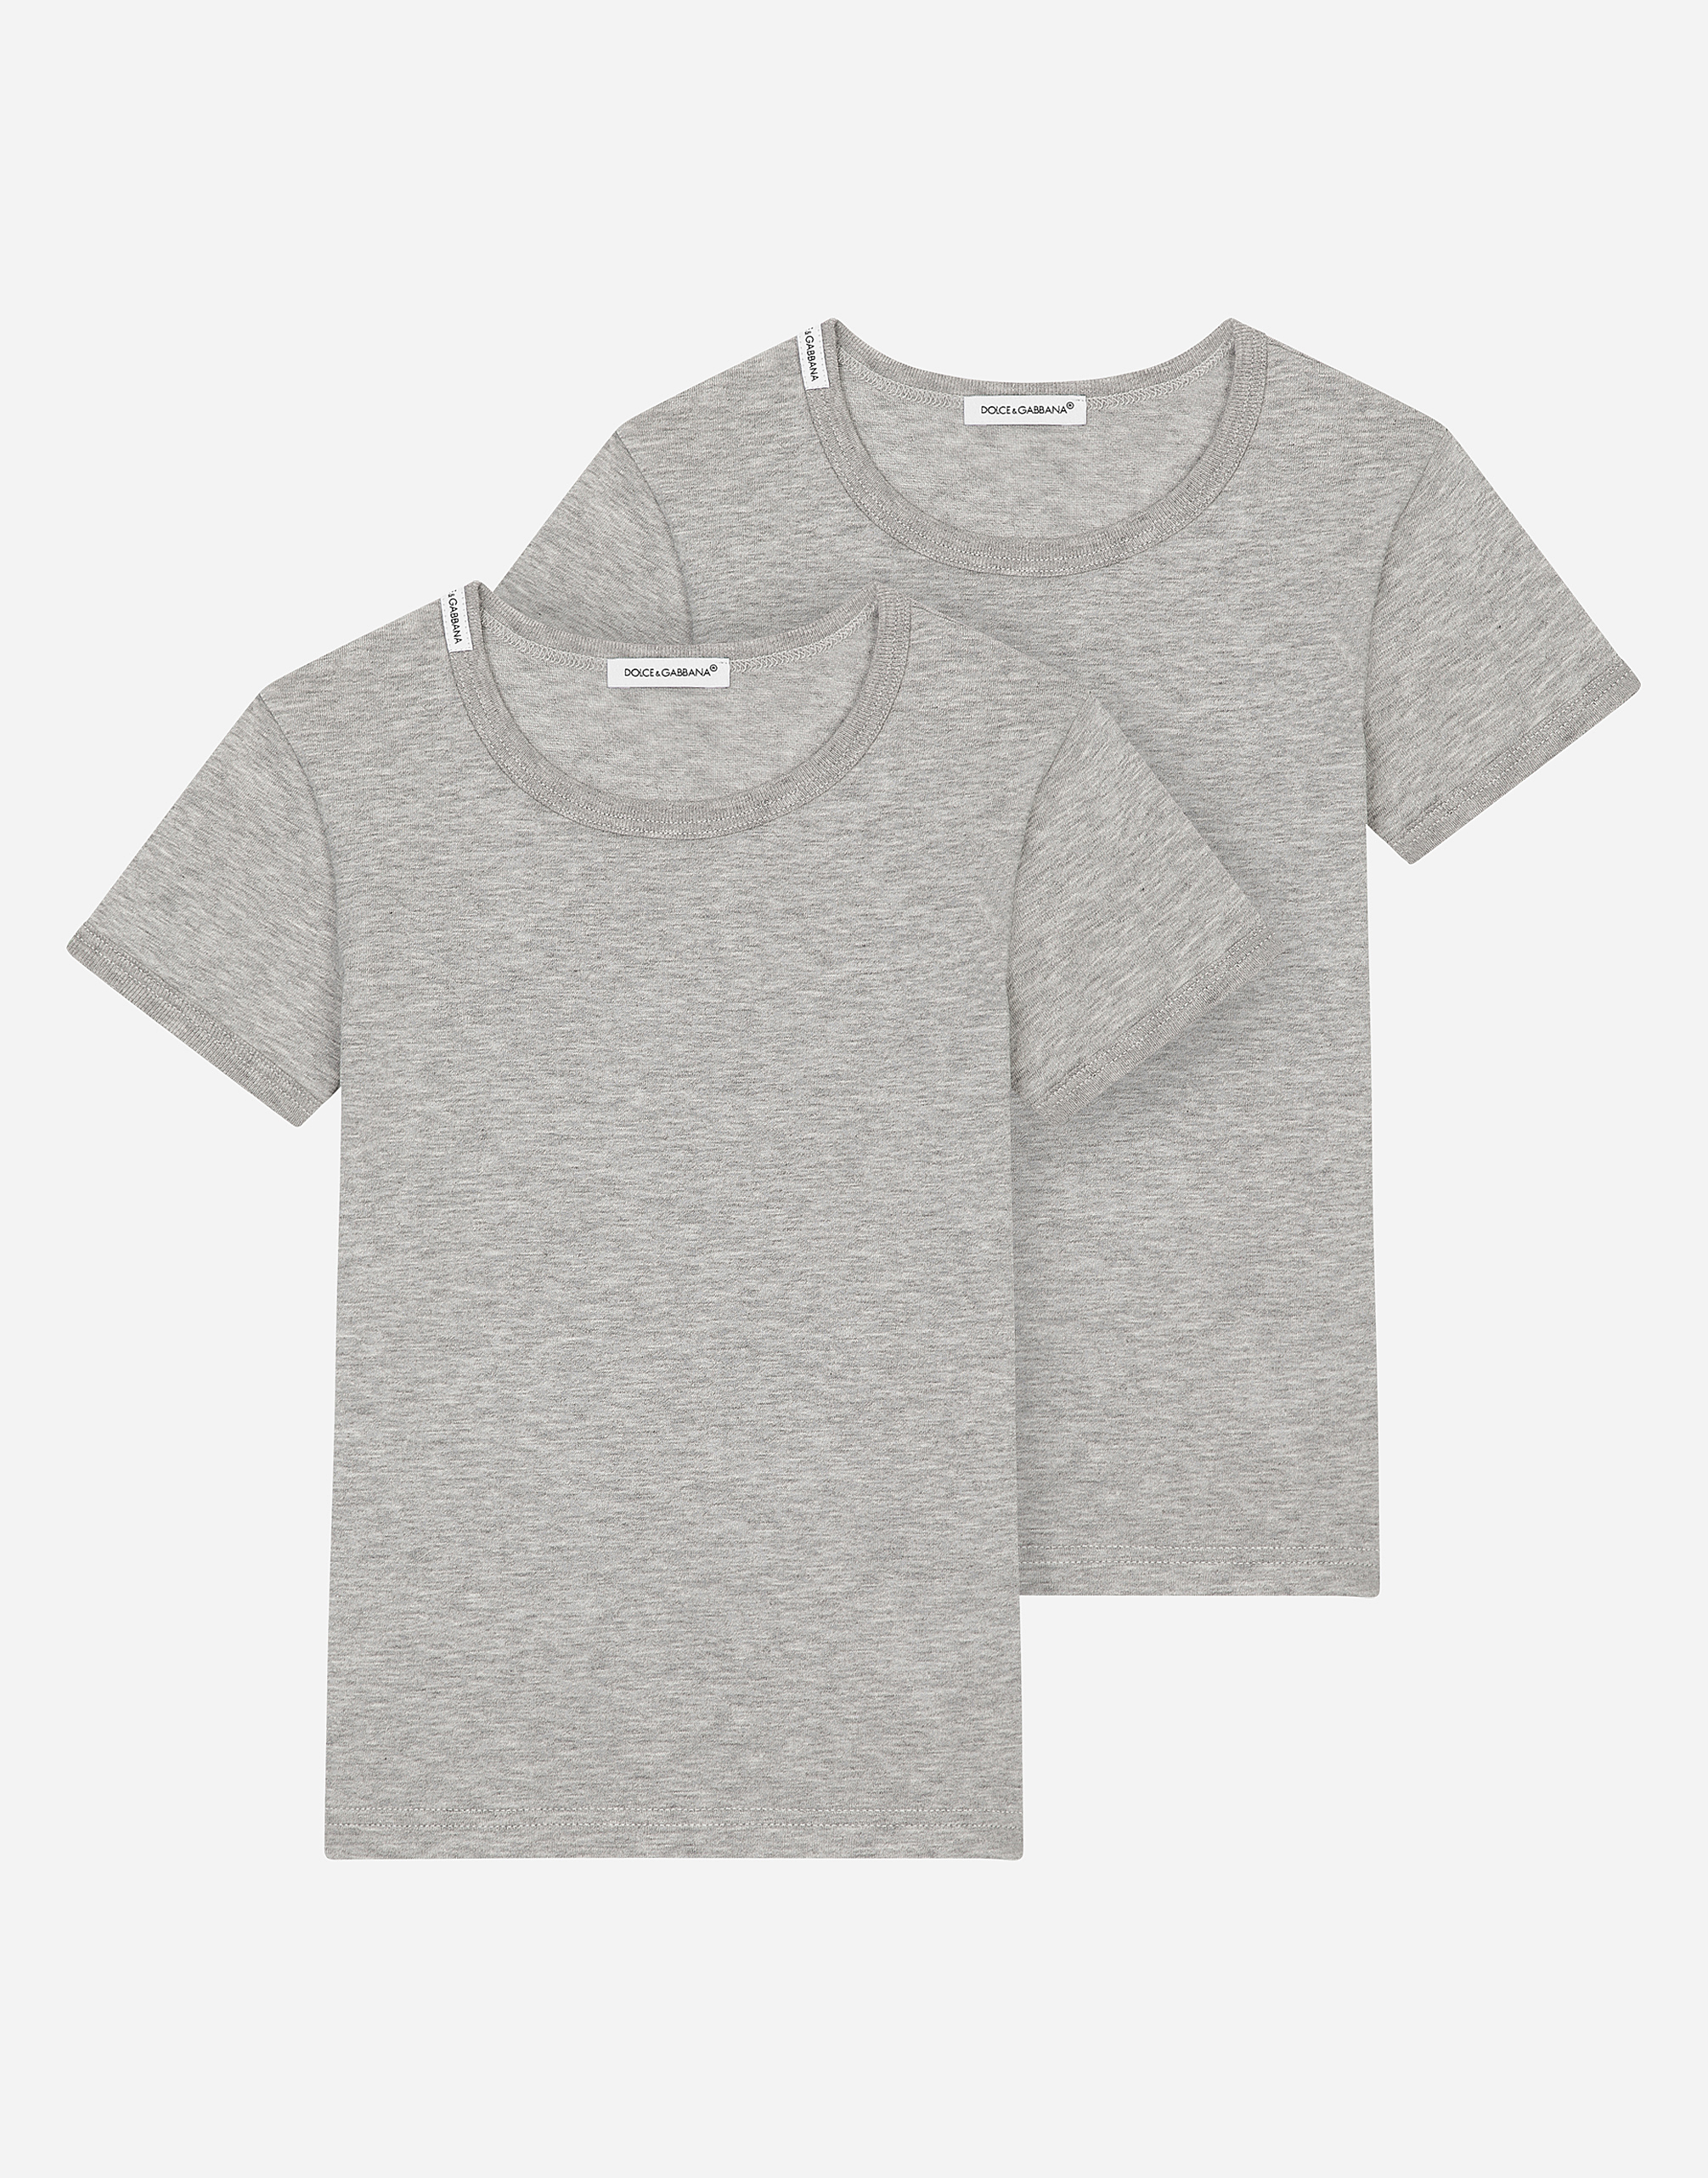 Short-sleeved jersey t-shirt two-pack in Grey